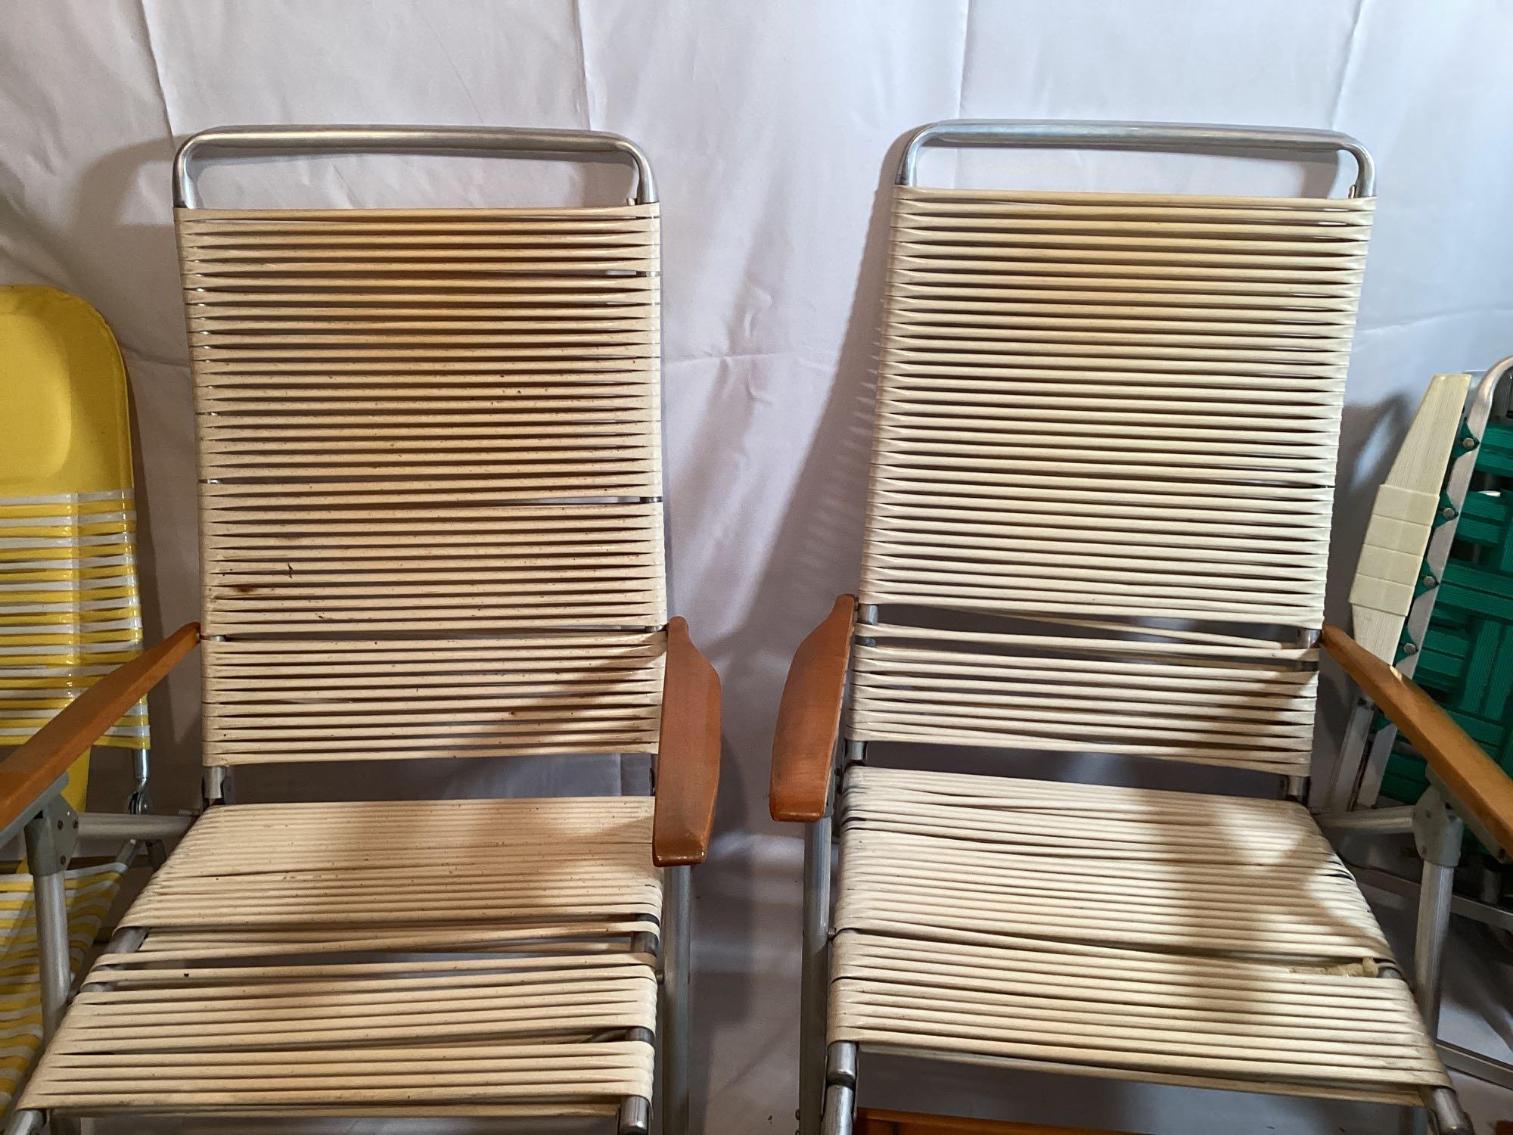 Image for Outdoor Chairs